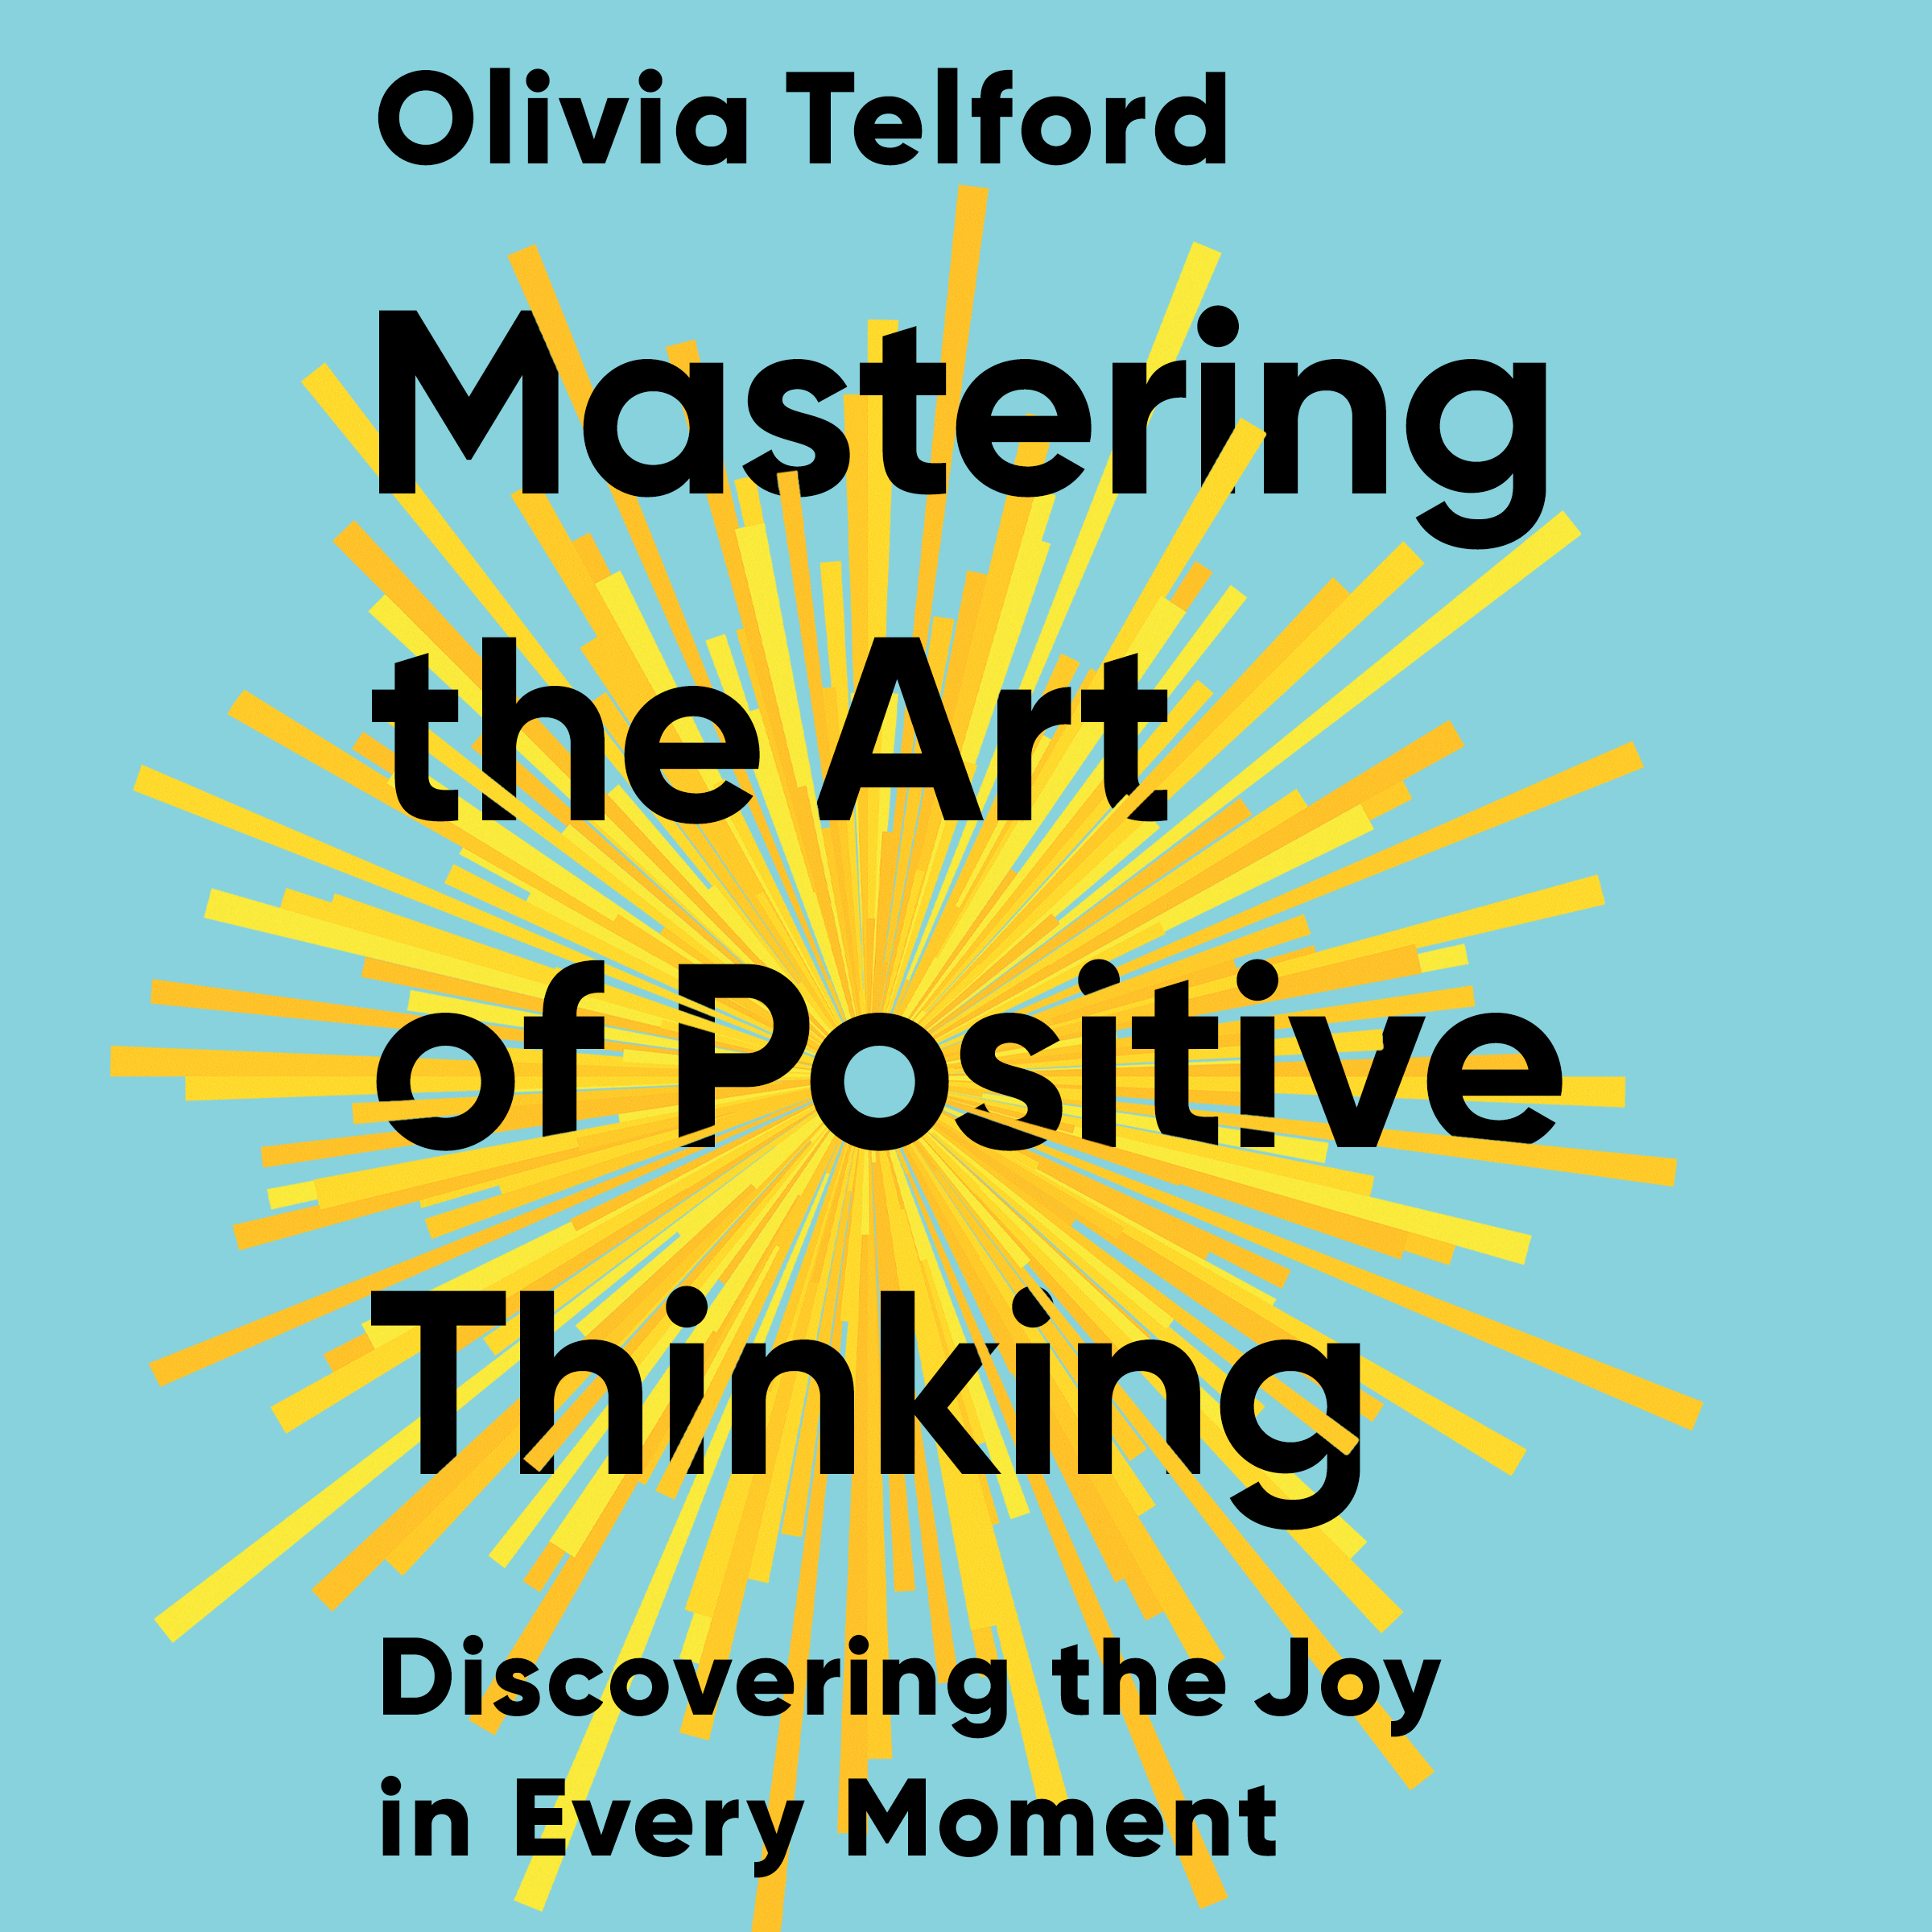 Mastering the Art of Positive Thinking by Olivia Telford